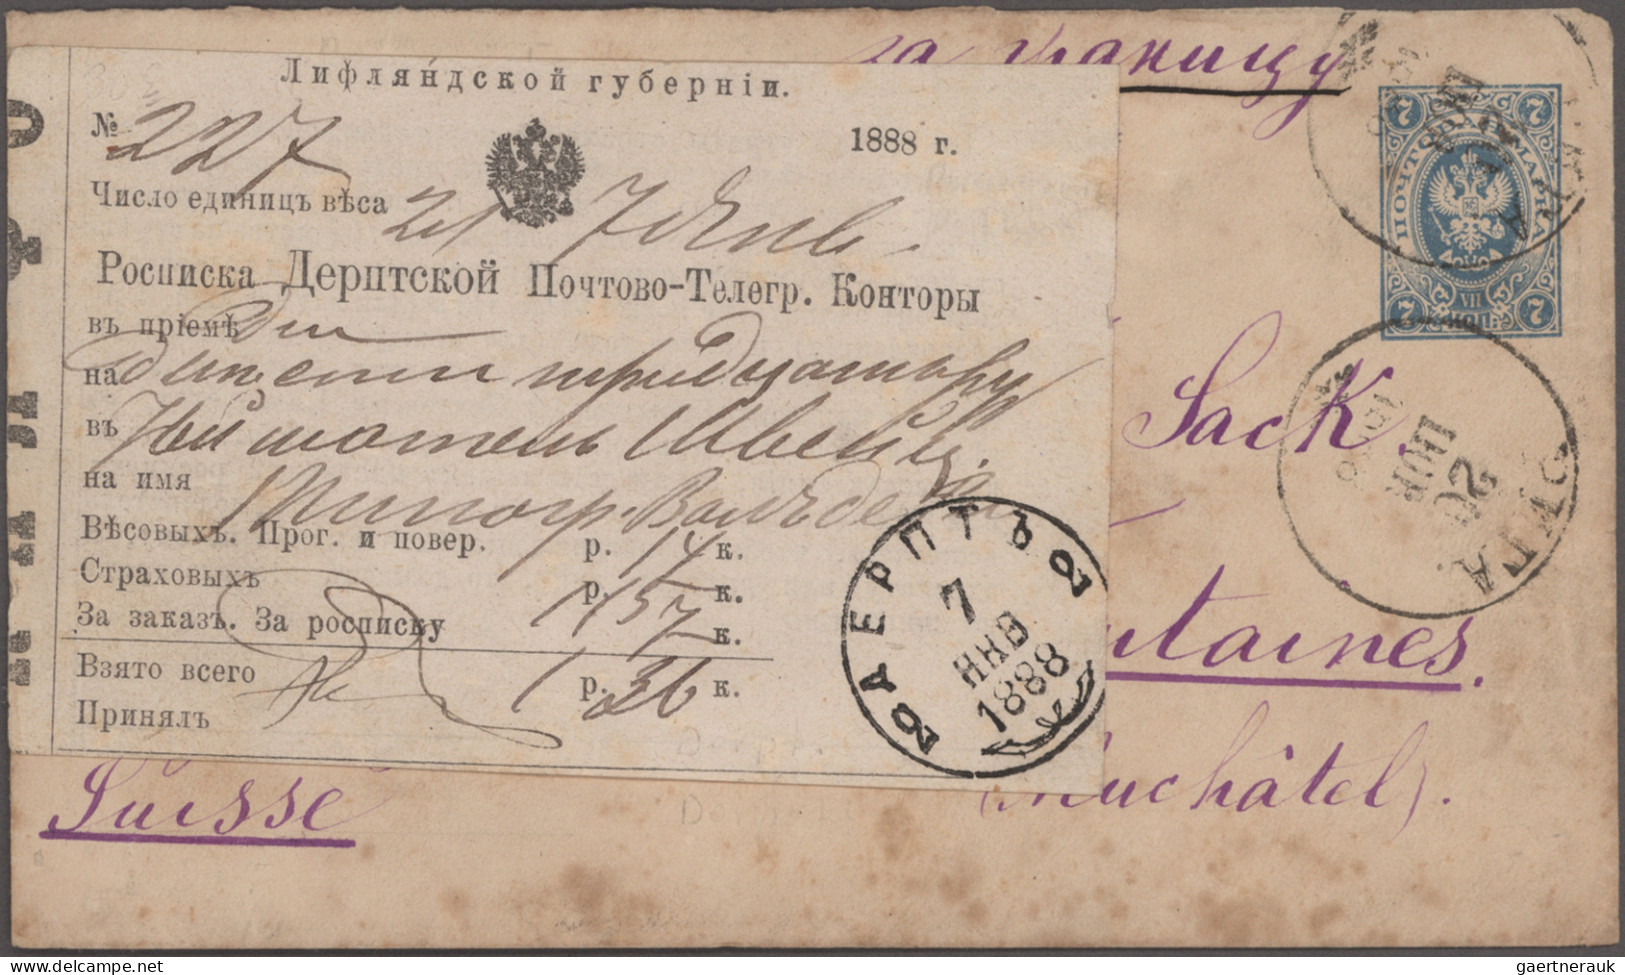 Russia: 1850/1910's: Collection of 33 postal stationery envelopes and cards, all